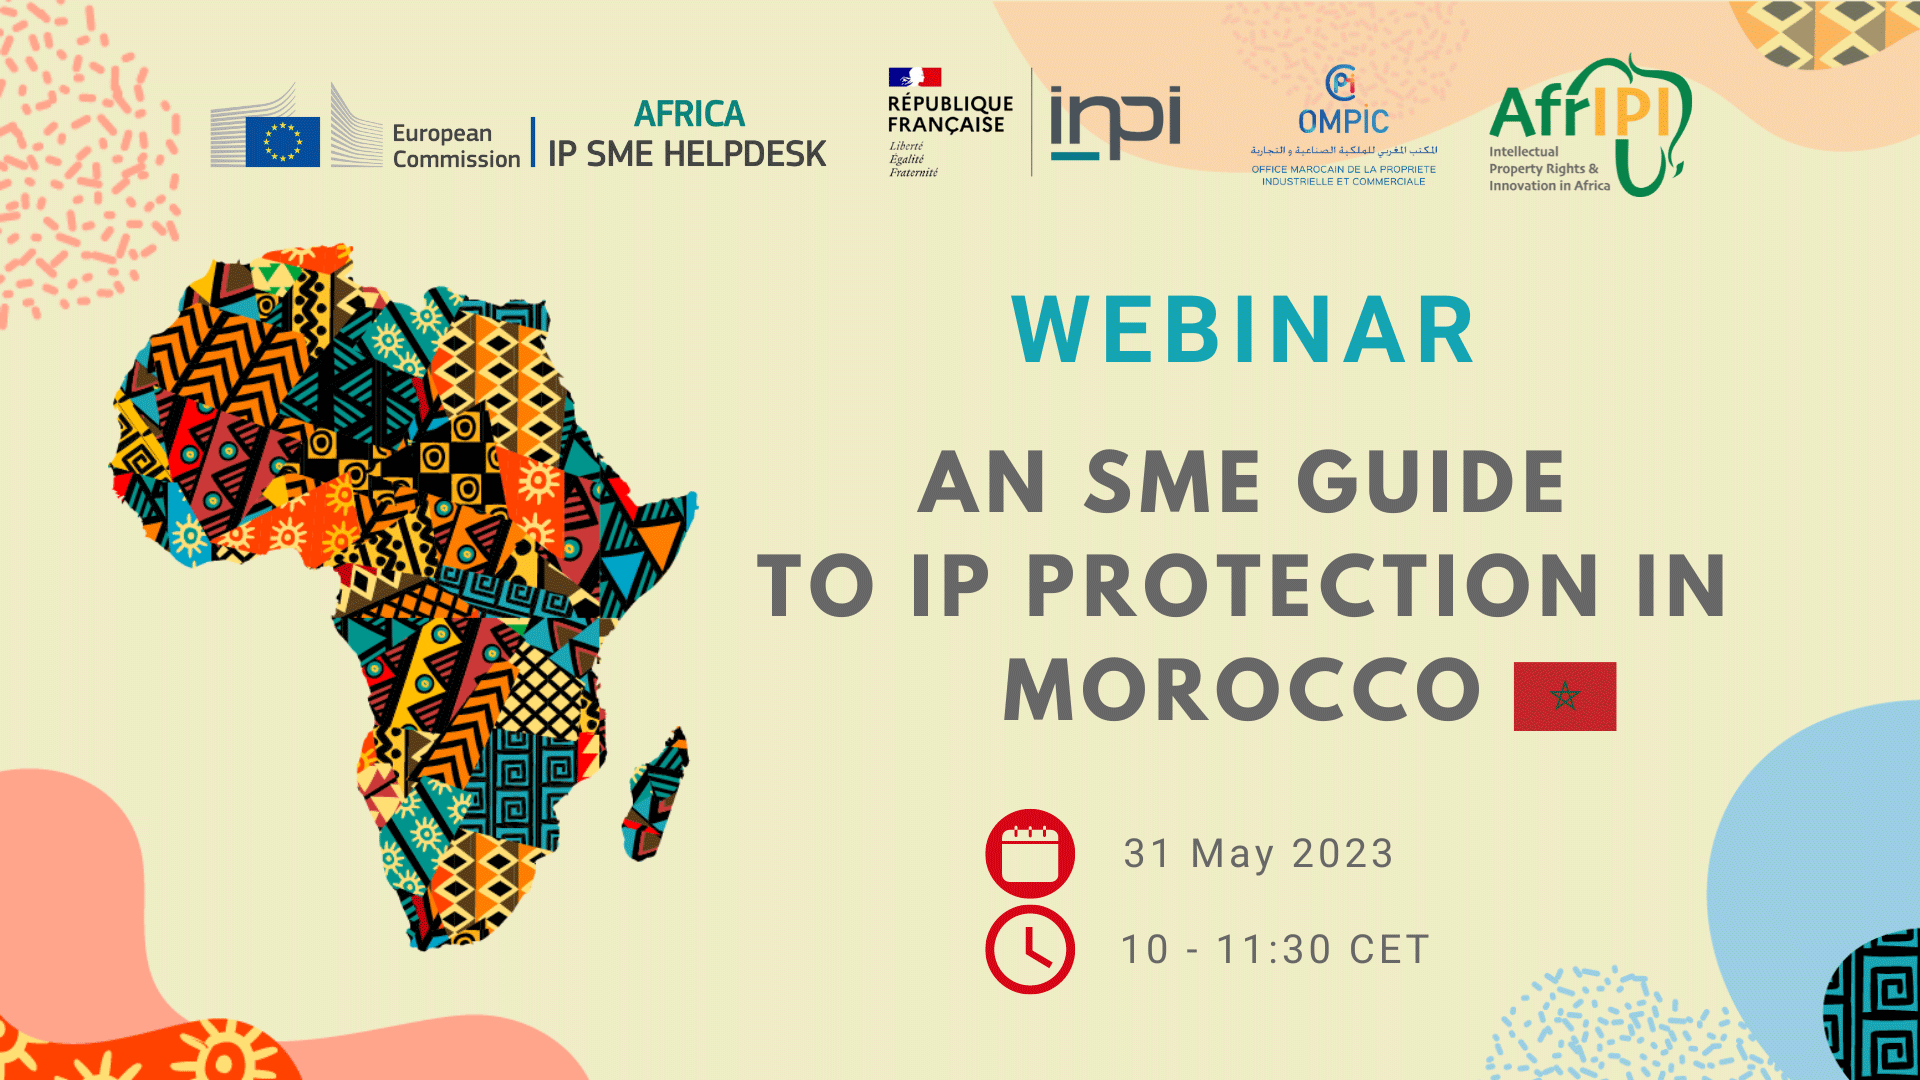 Webinar Morocco with logo and title for the event